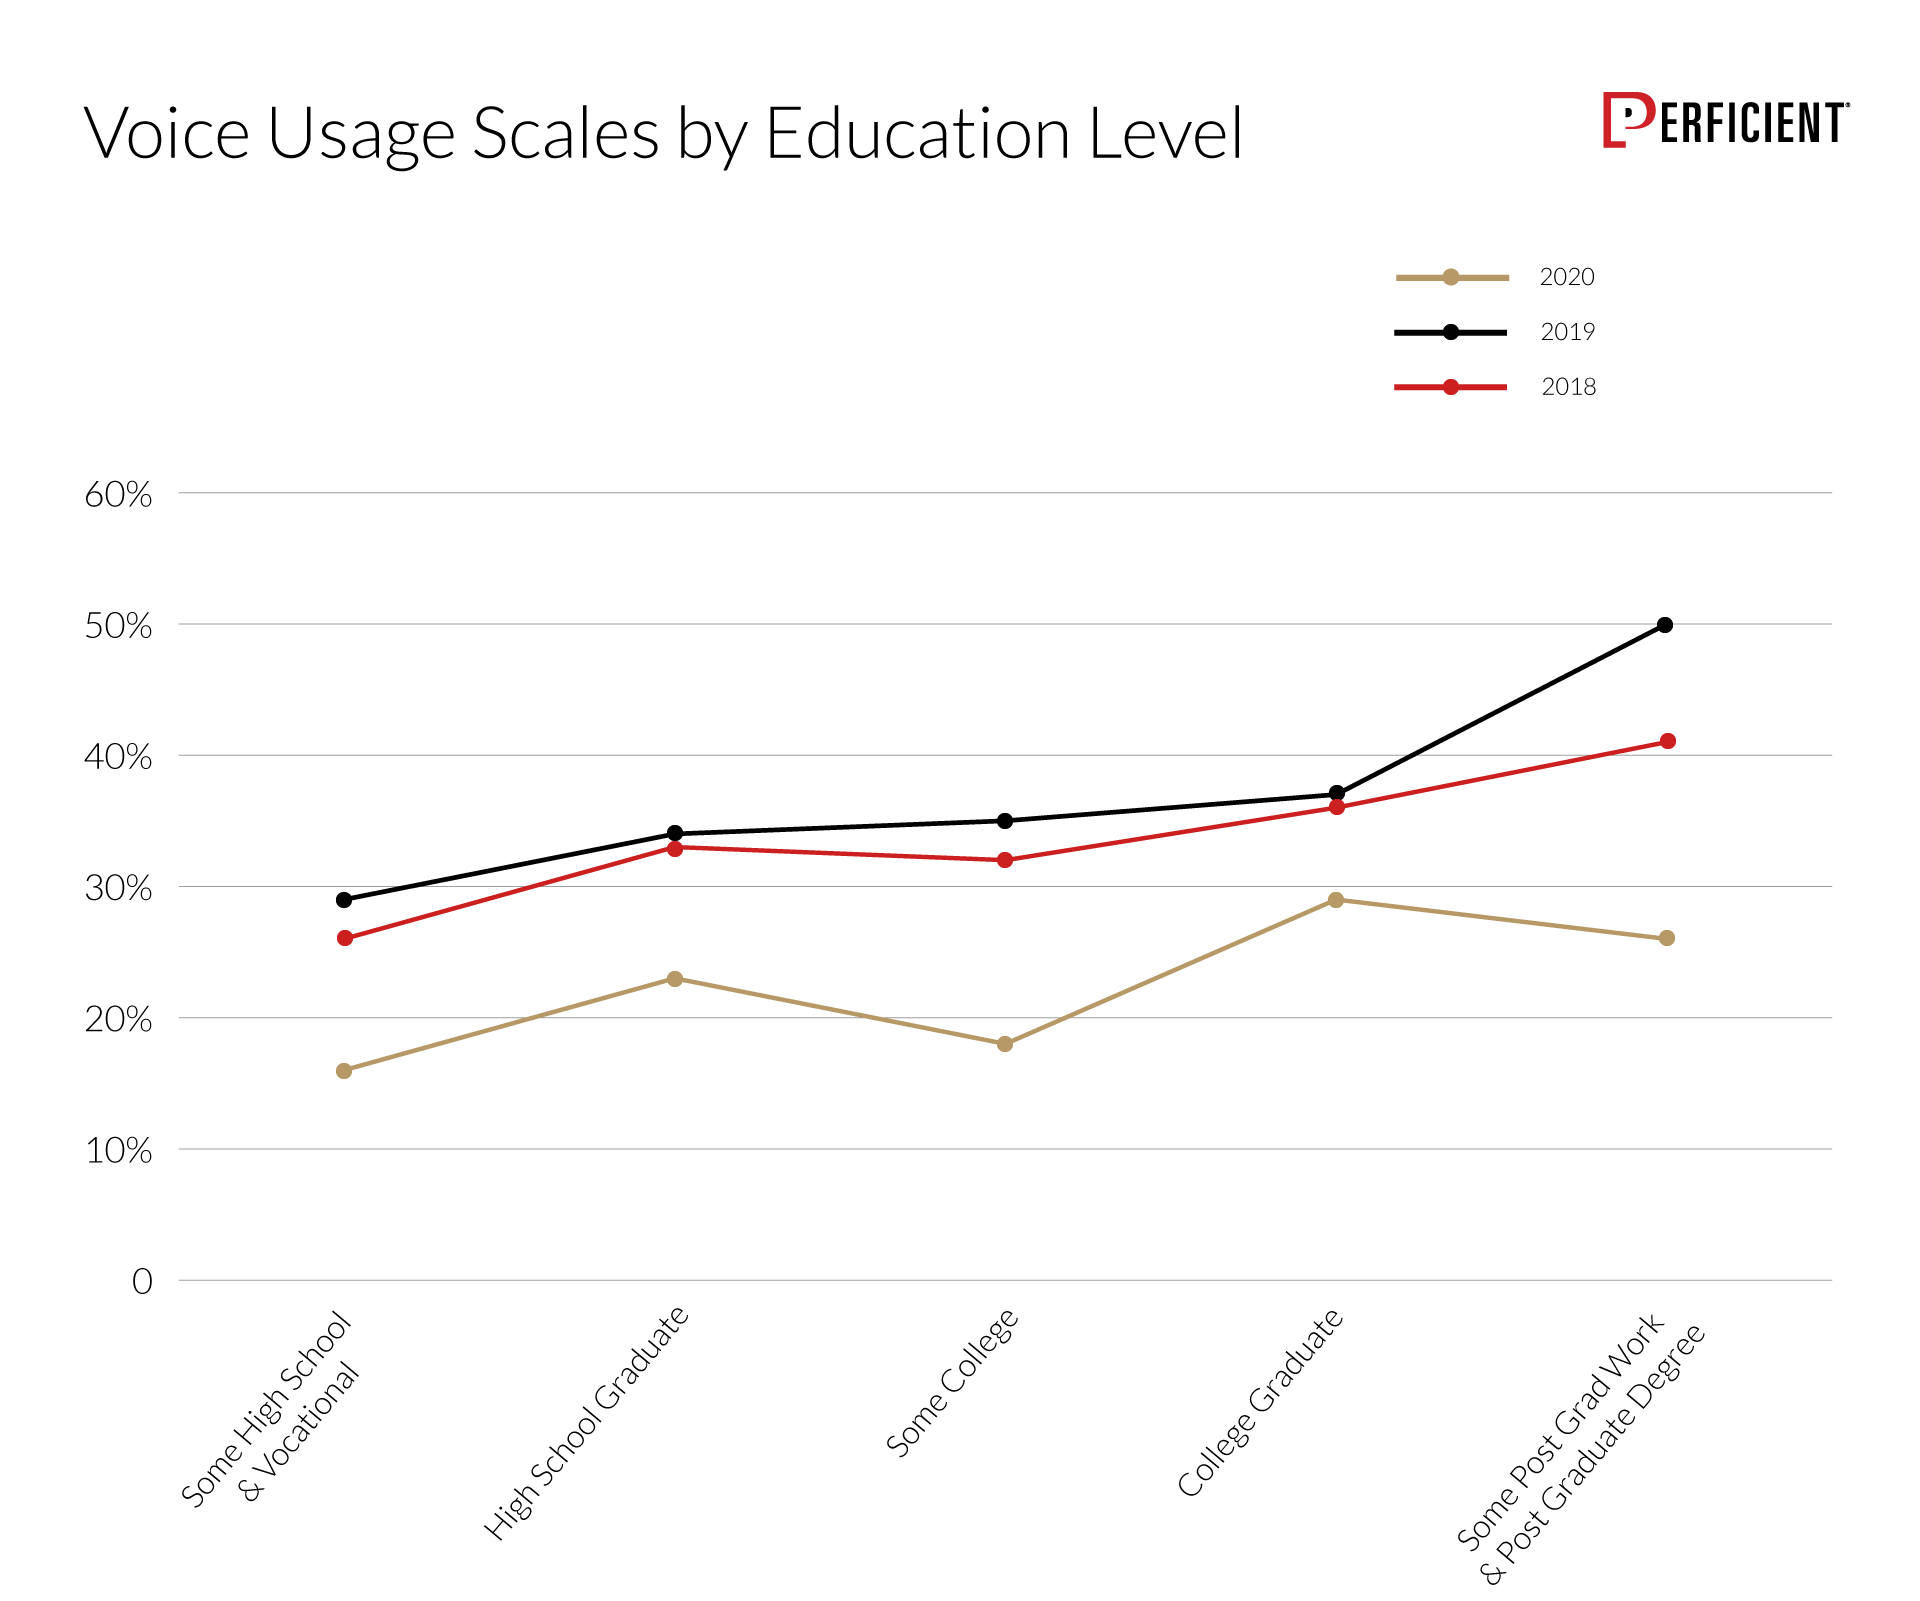 Voice usage seems to scale with education level